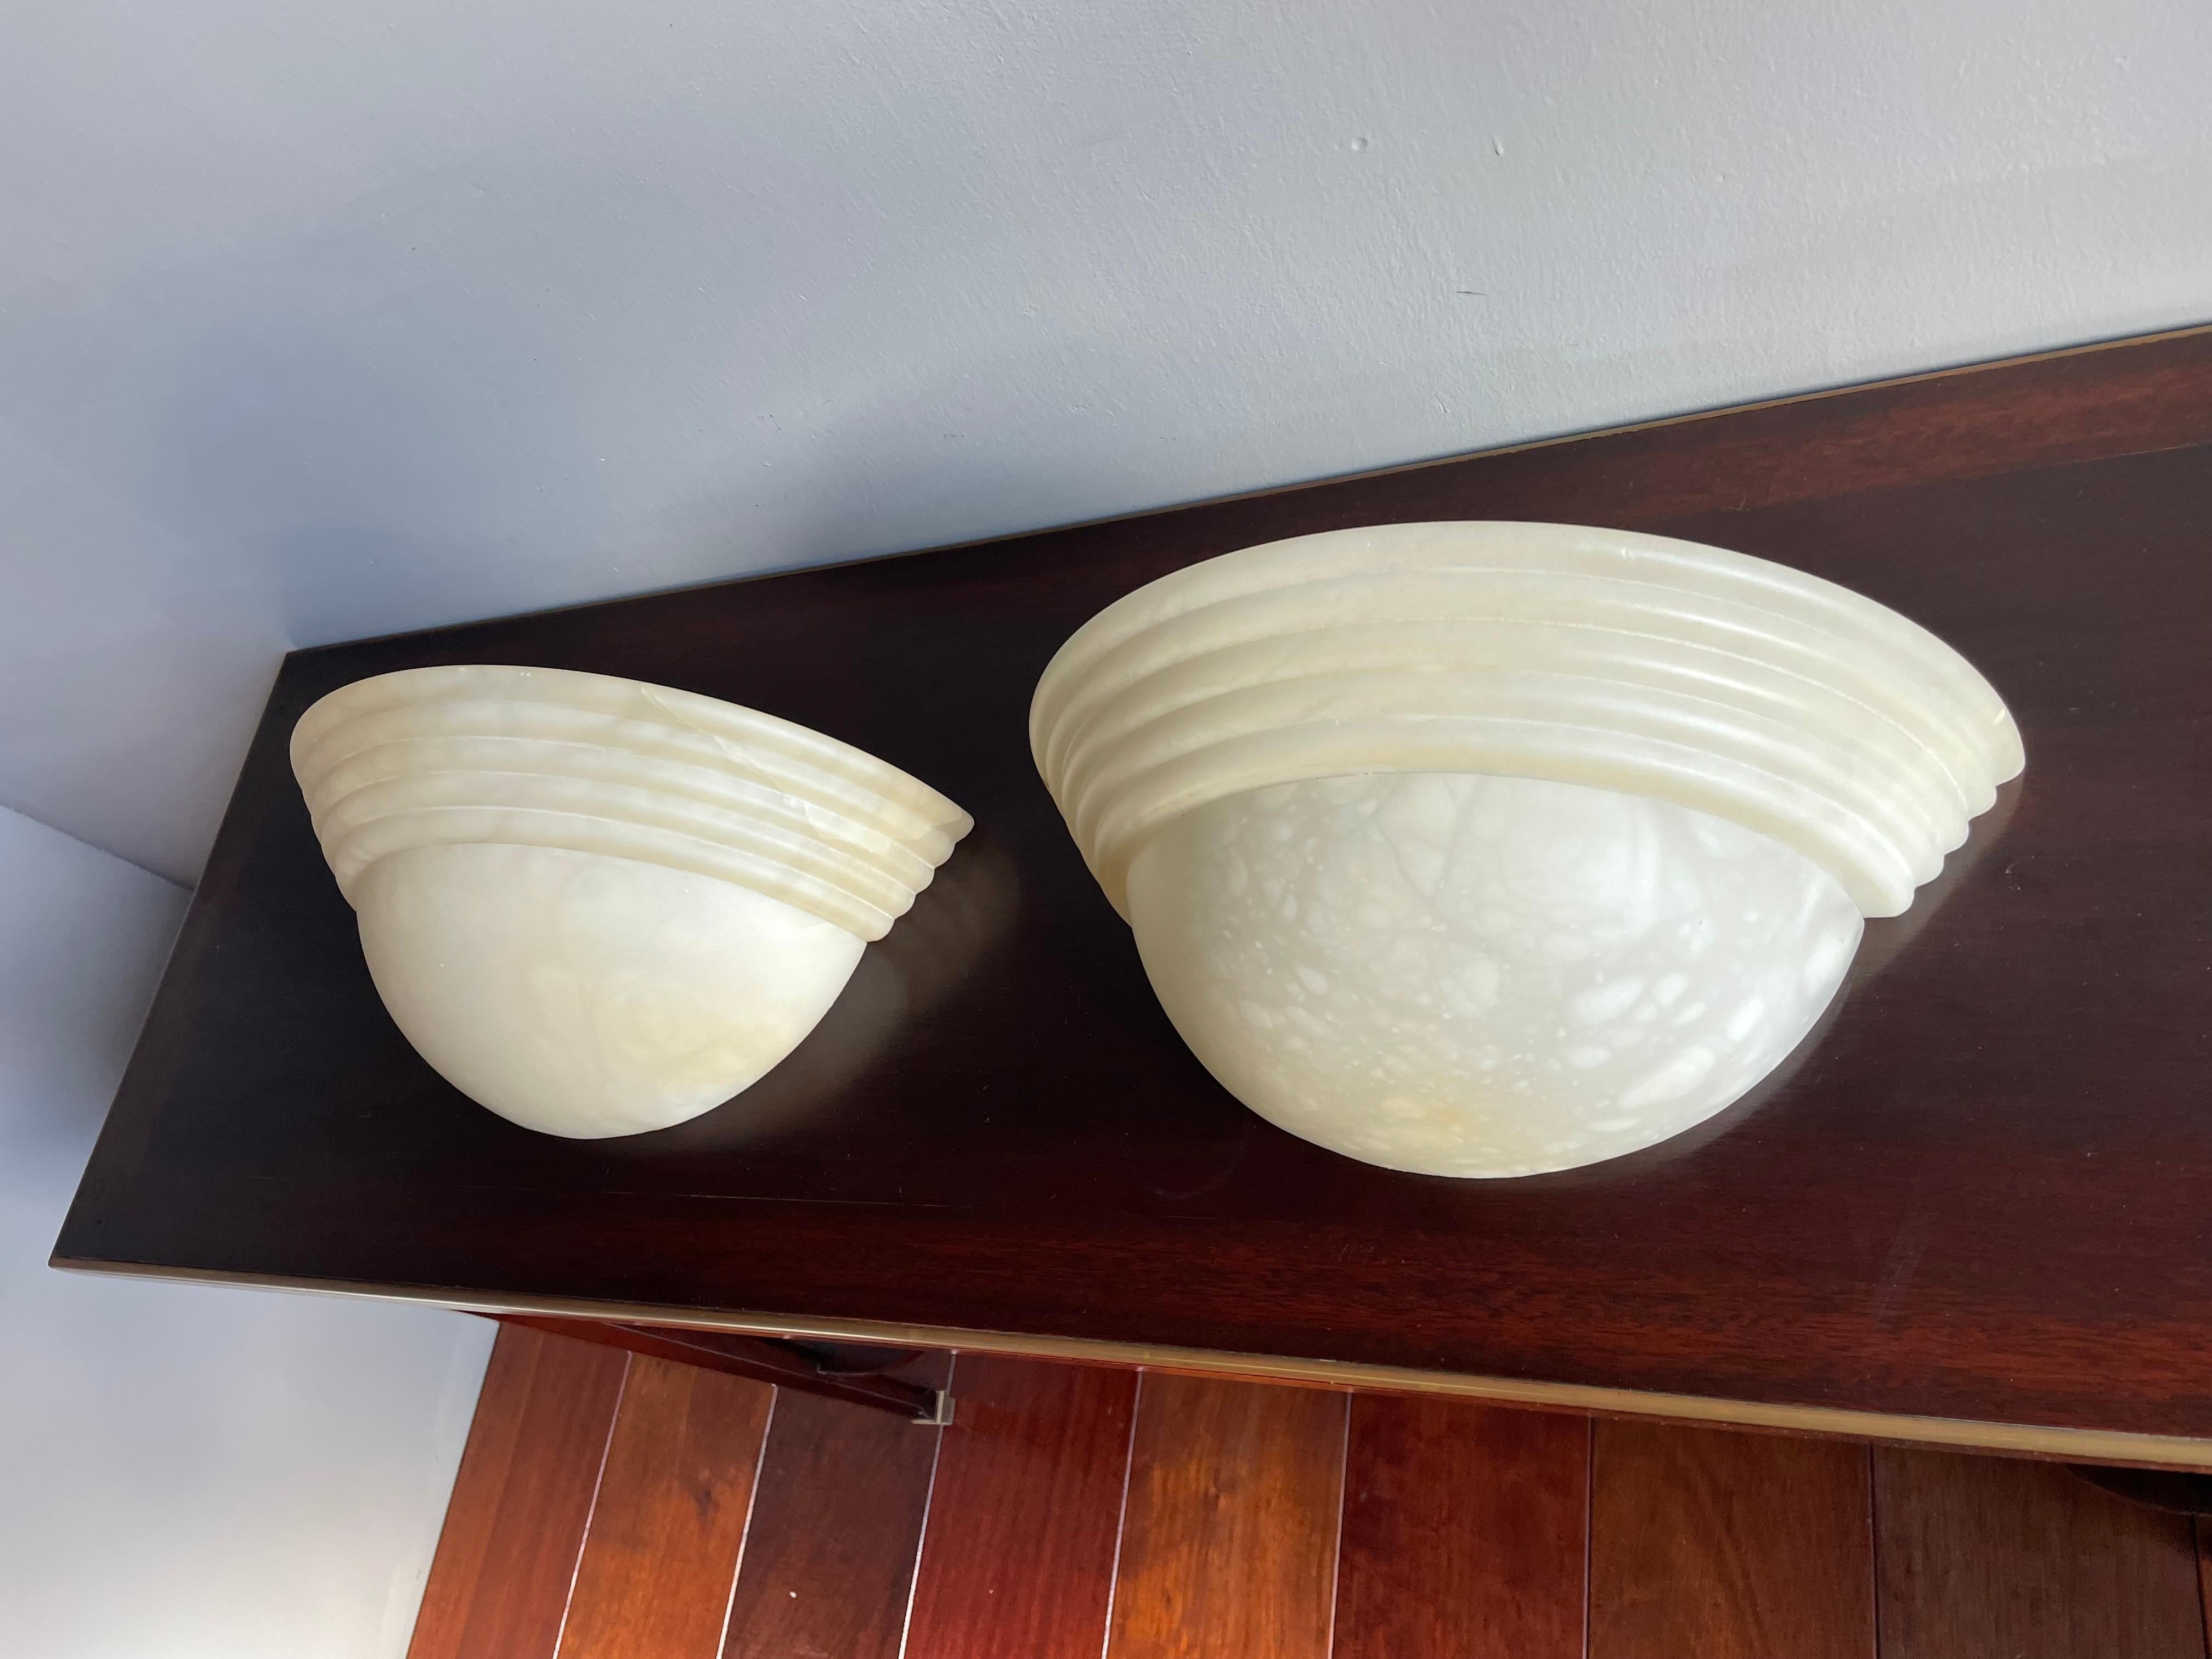 Great looking, easy to mount and beautifully handcrafted pair of alabaster wall lights.

If you are looking for a stylish and timeless way to bring light into your entry hall, bathroom, kitchen or bedroom or if you are looking for the perfect wall